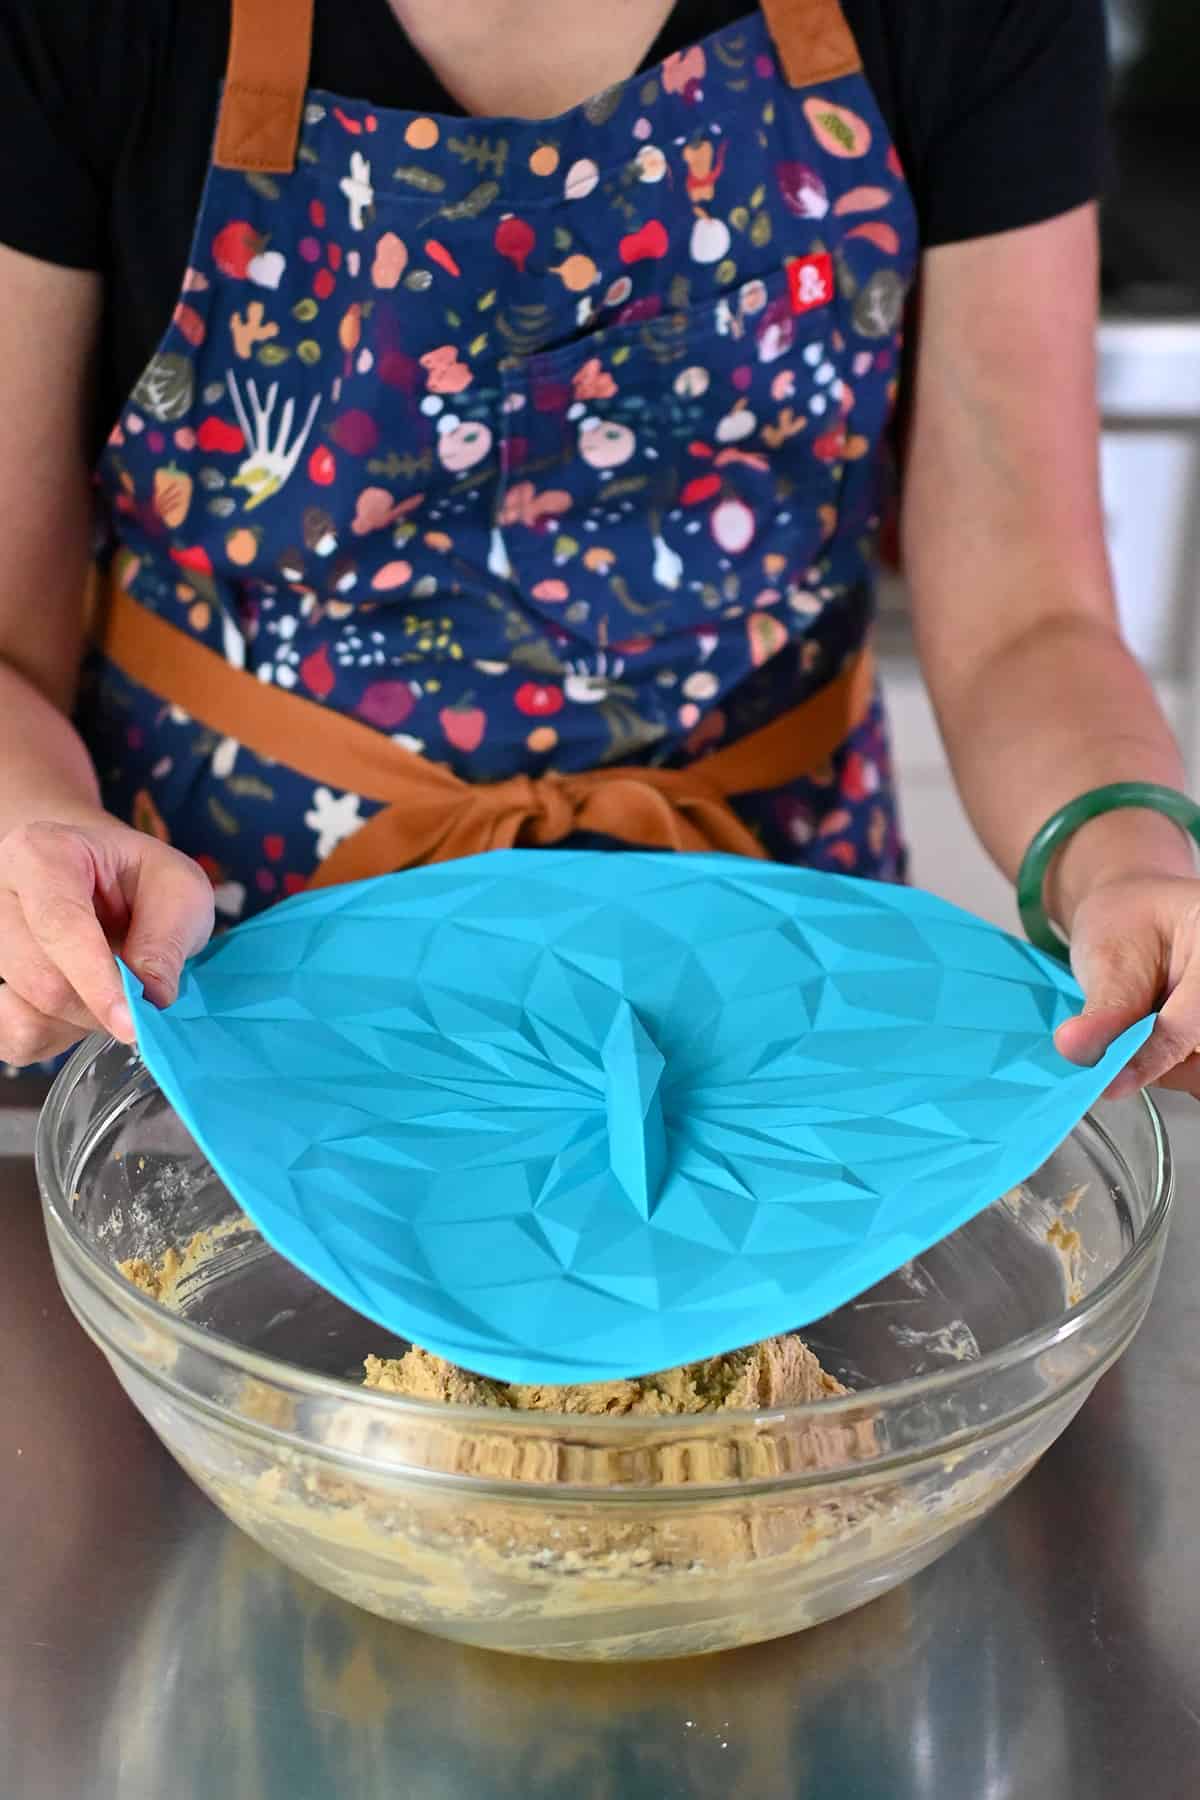 Covering a bowl filled with raw snickerdoodle dough with a blue silicone lid before chilling it in the fridge.